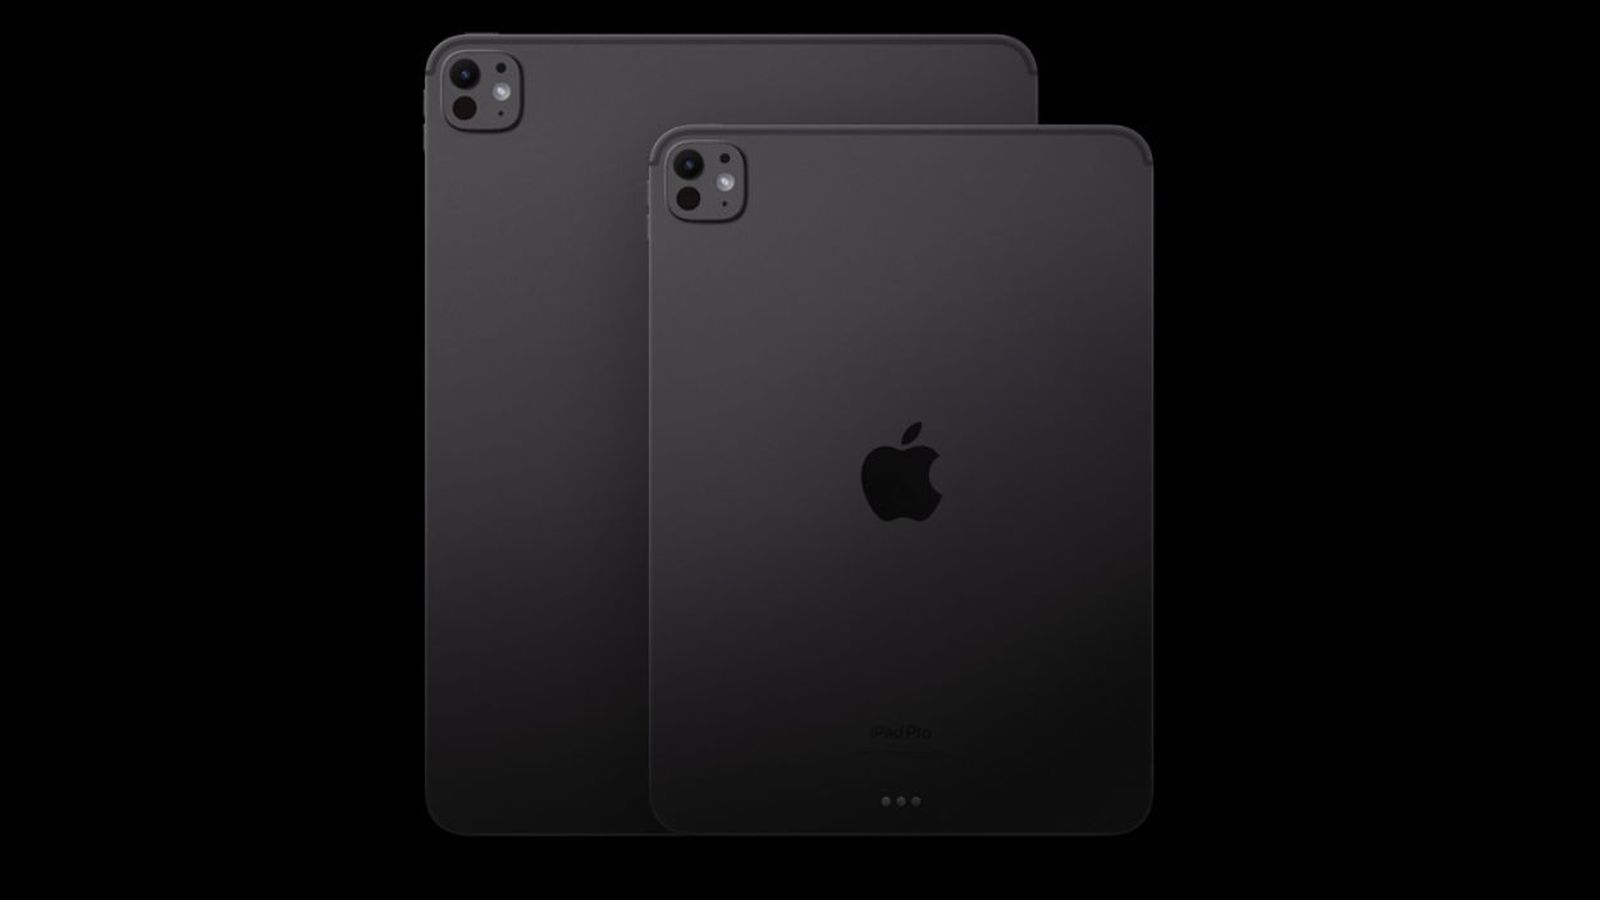 The company's recent iPad models have a landscape oriented camera